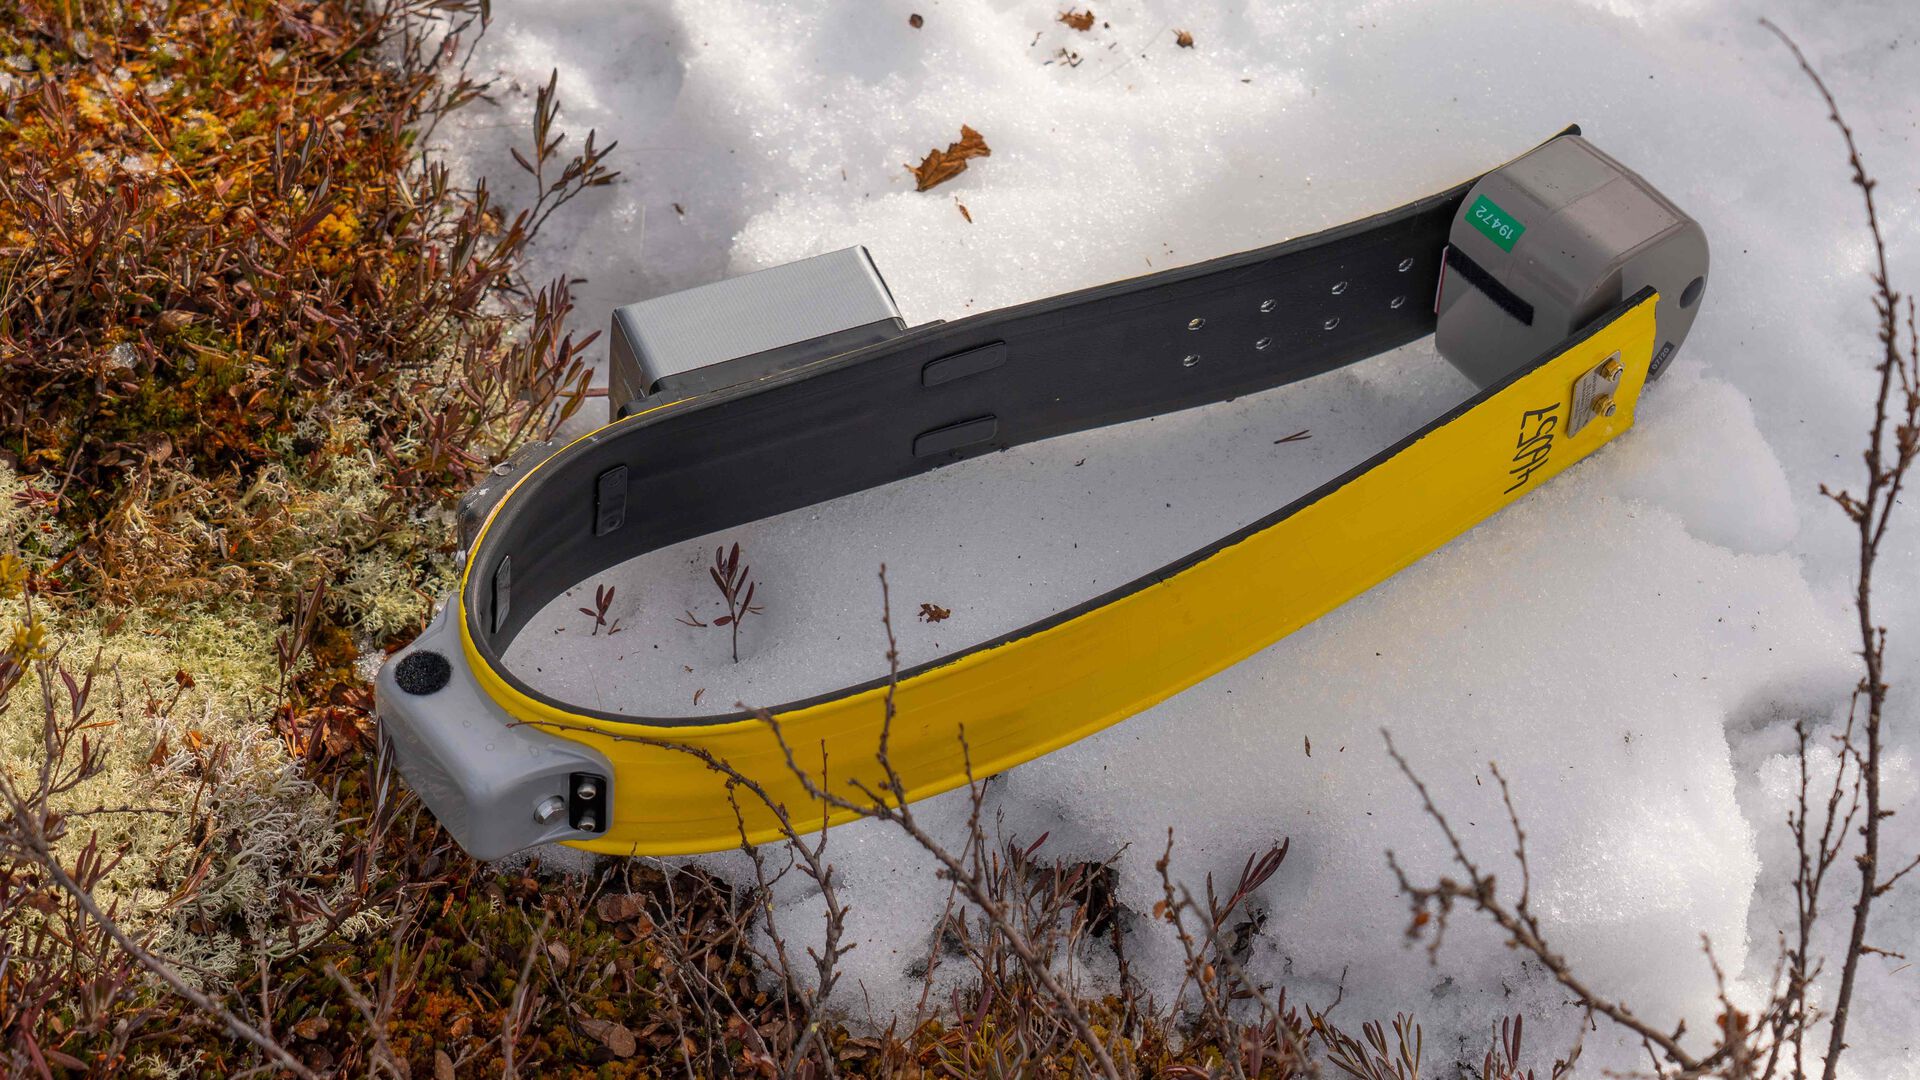 A yellow GPS collar lies on the snow on the ground, there is moss and lichen on the outskirts of the snow.